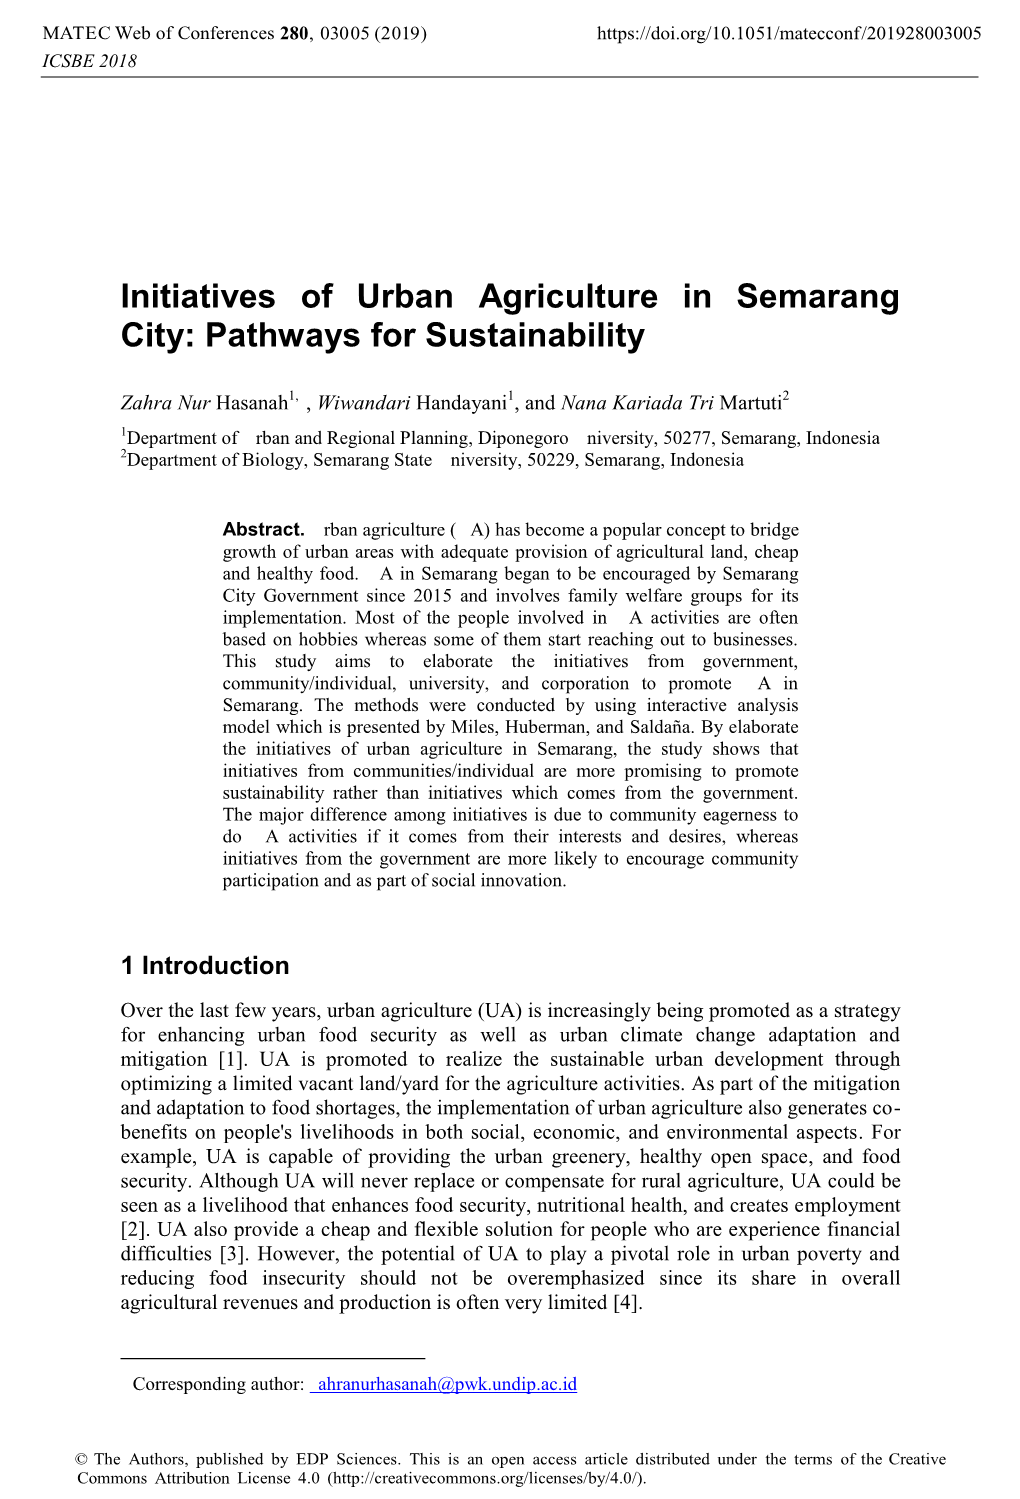 Initiatives of Urban Agriculture in Semarang City: Pathways for Sustainability